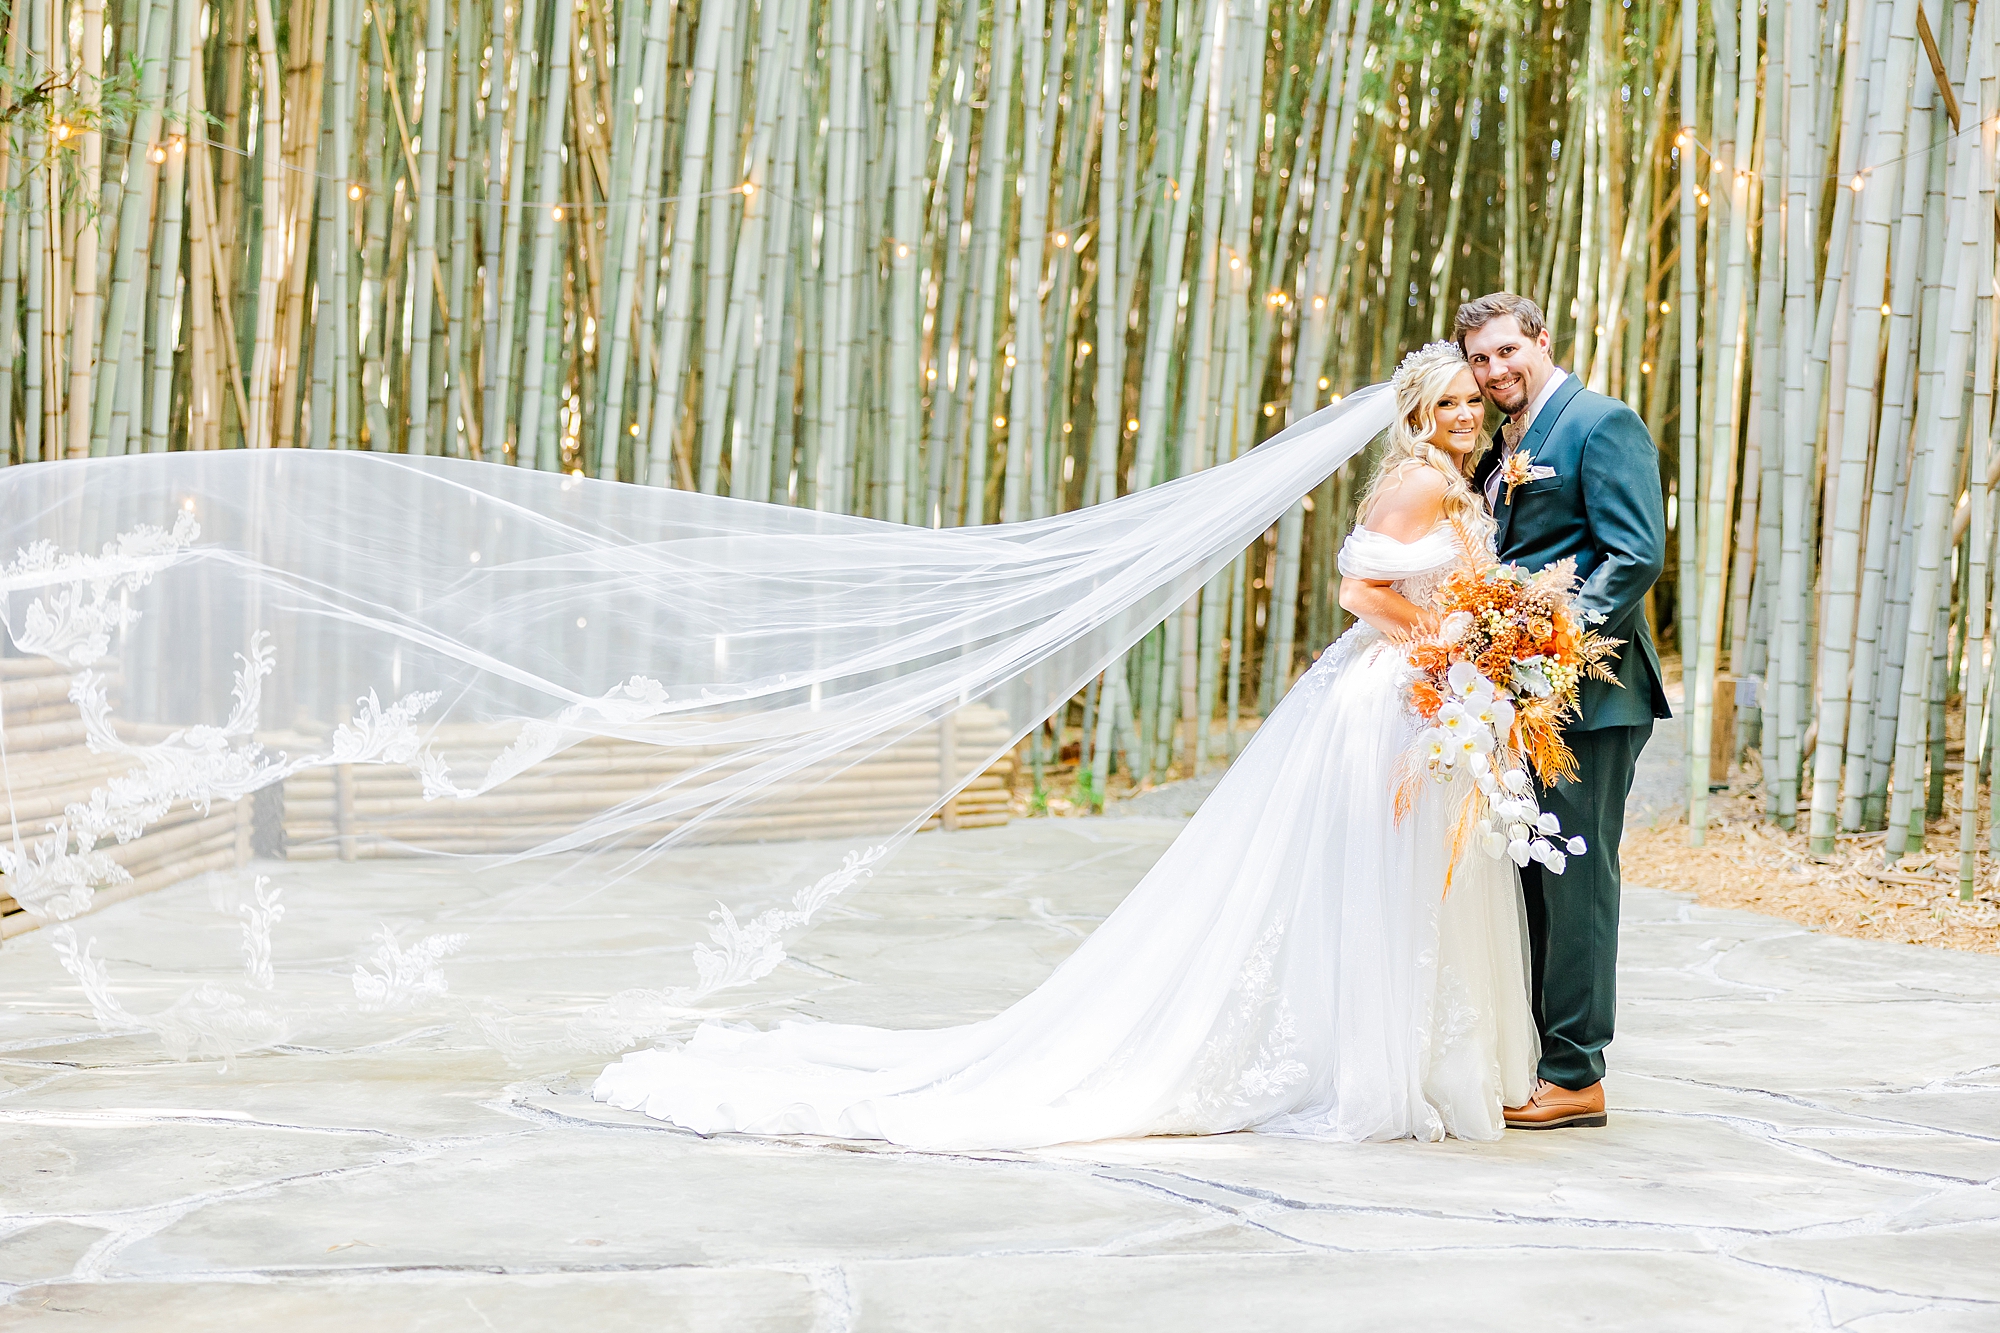 bride and groom hug with bride's veil floating behind them among bamboo shoots 